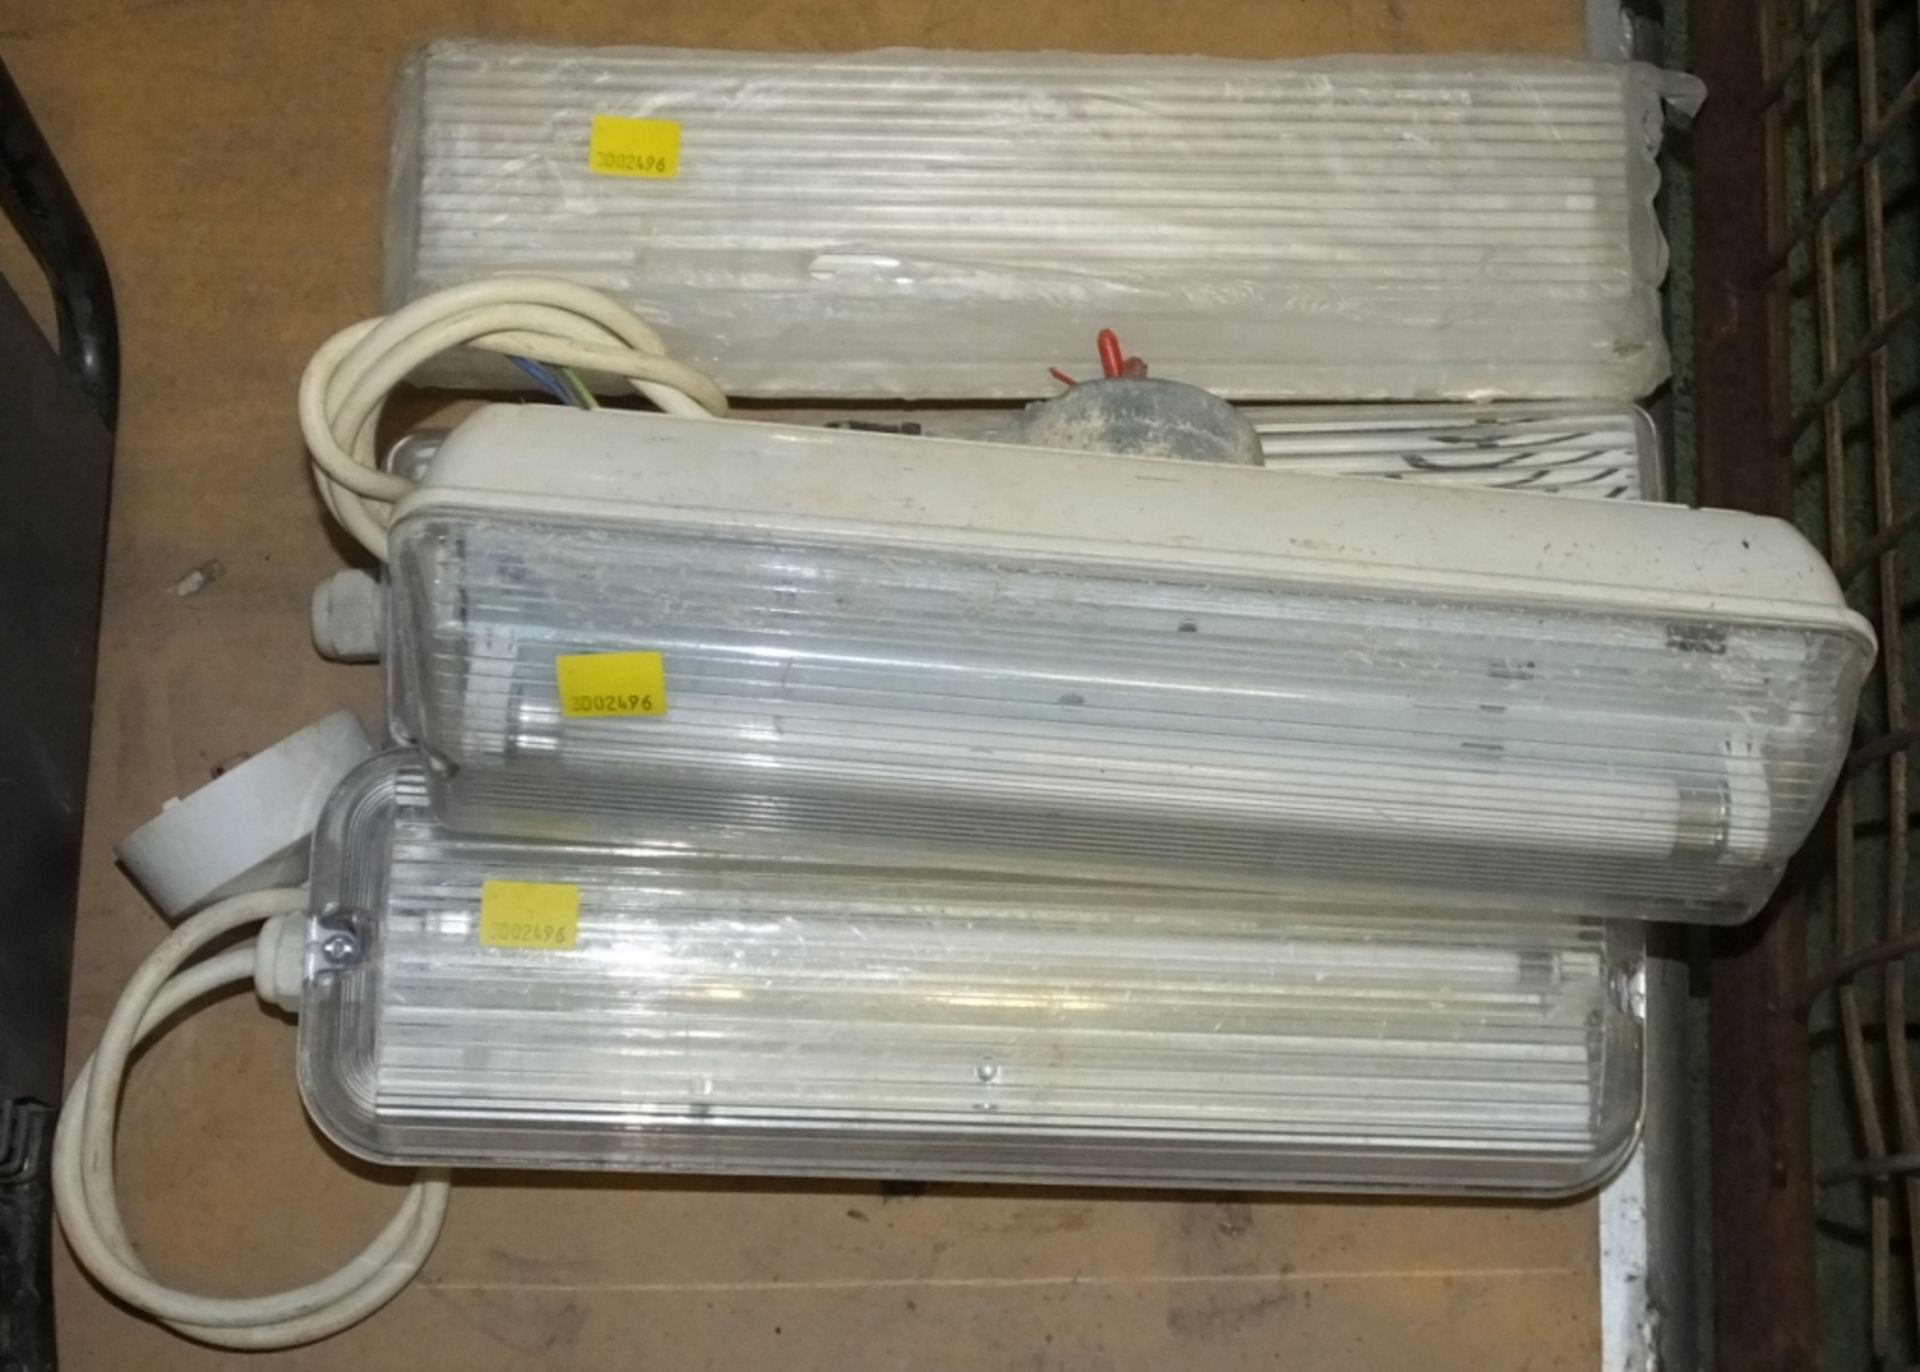 Electric Equipment - Heaters, Lights - Image 4 of 5